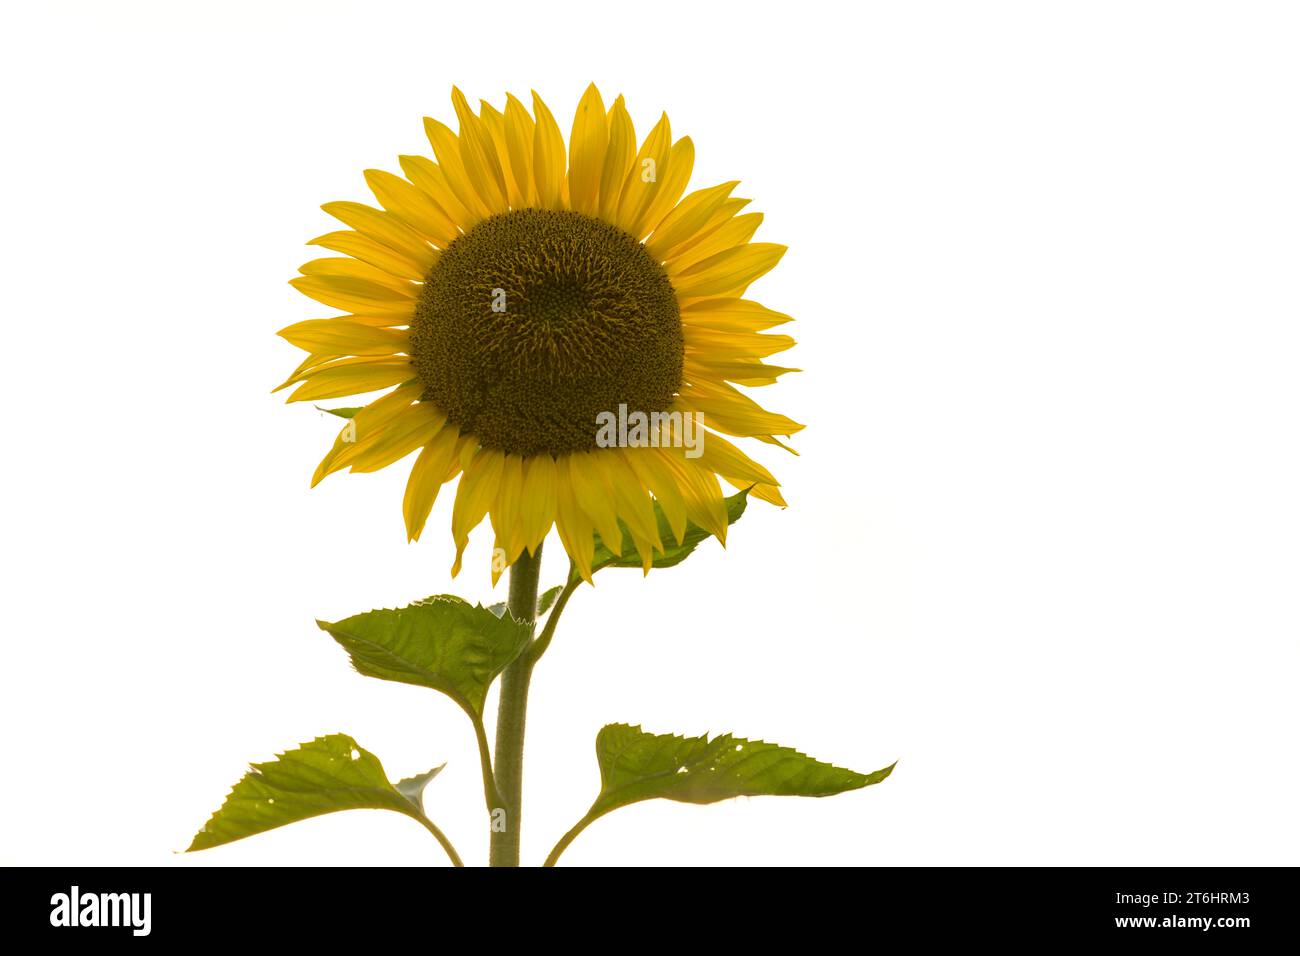 Flower of a sunflower (Helianthus annuus), Germany Stock Photo